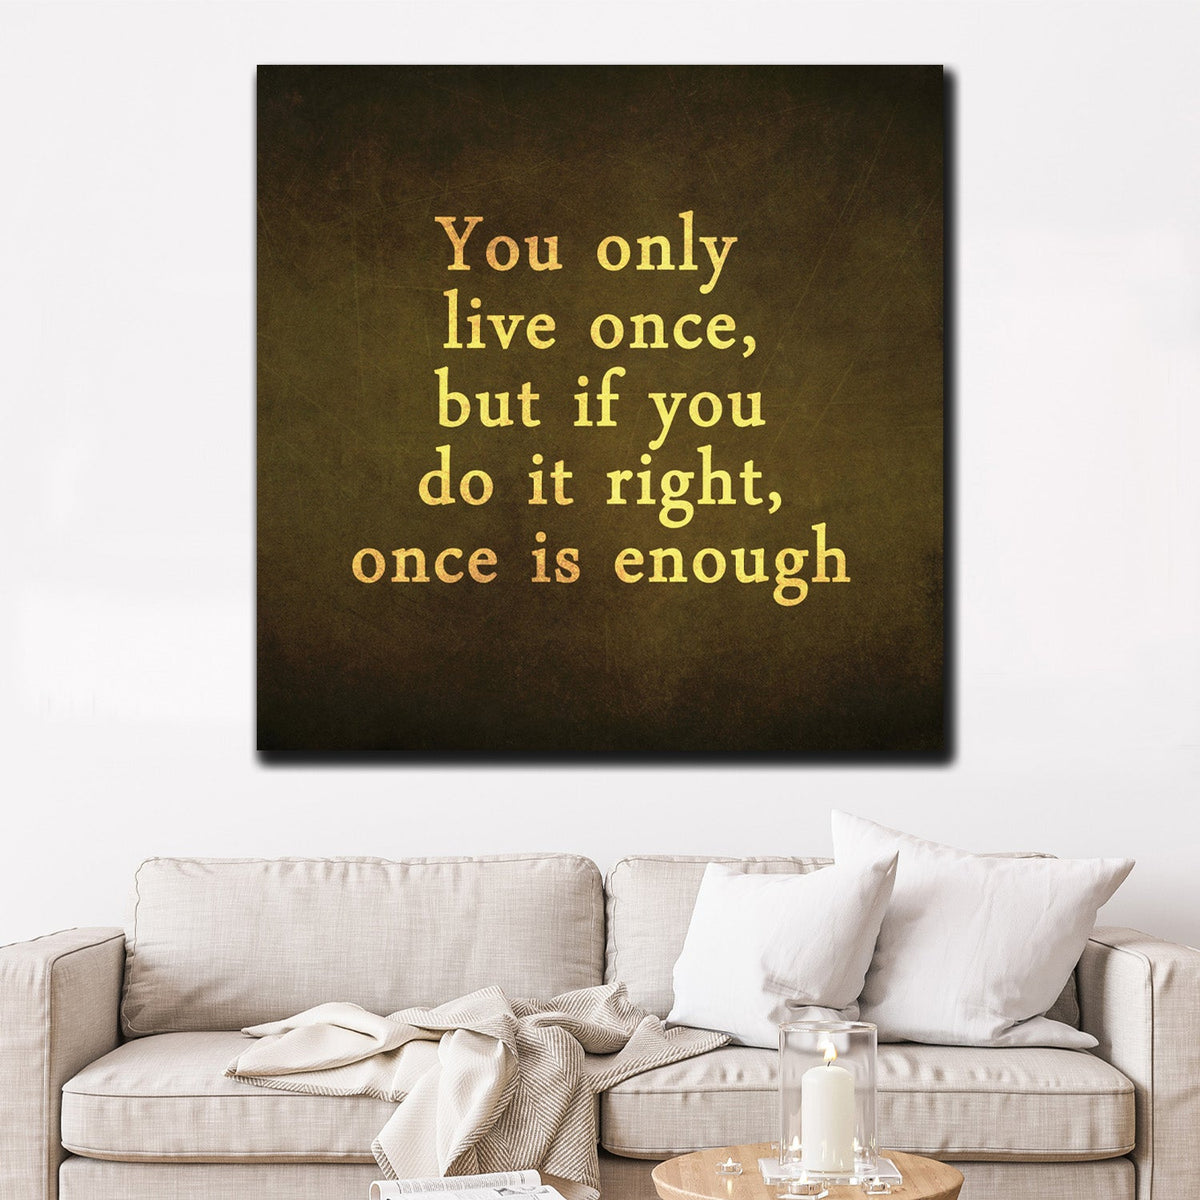 https://cdn.shopify.com/s/files/1/0387/9986/8044/products/YouOnlyLiveOnceCanvasArtprintStretched-1.jpg